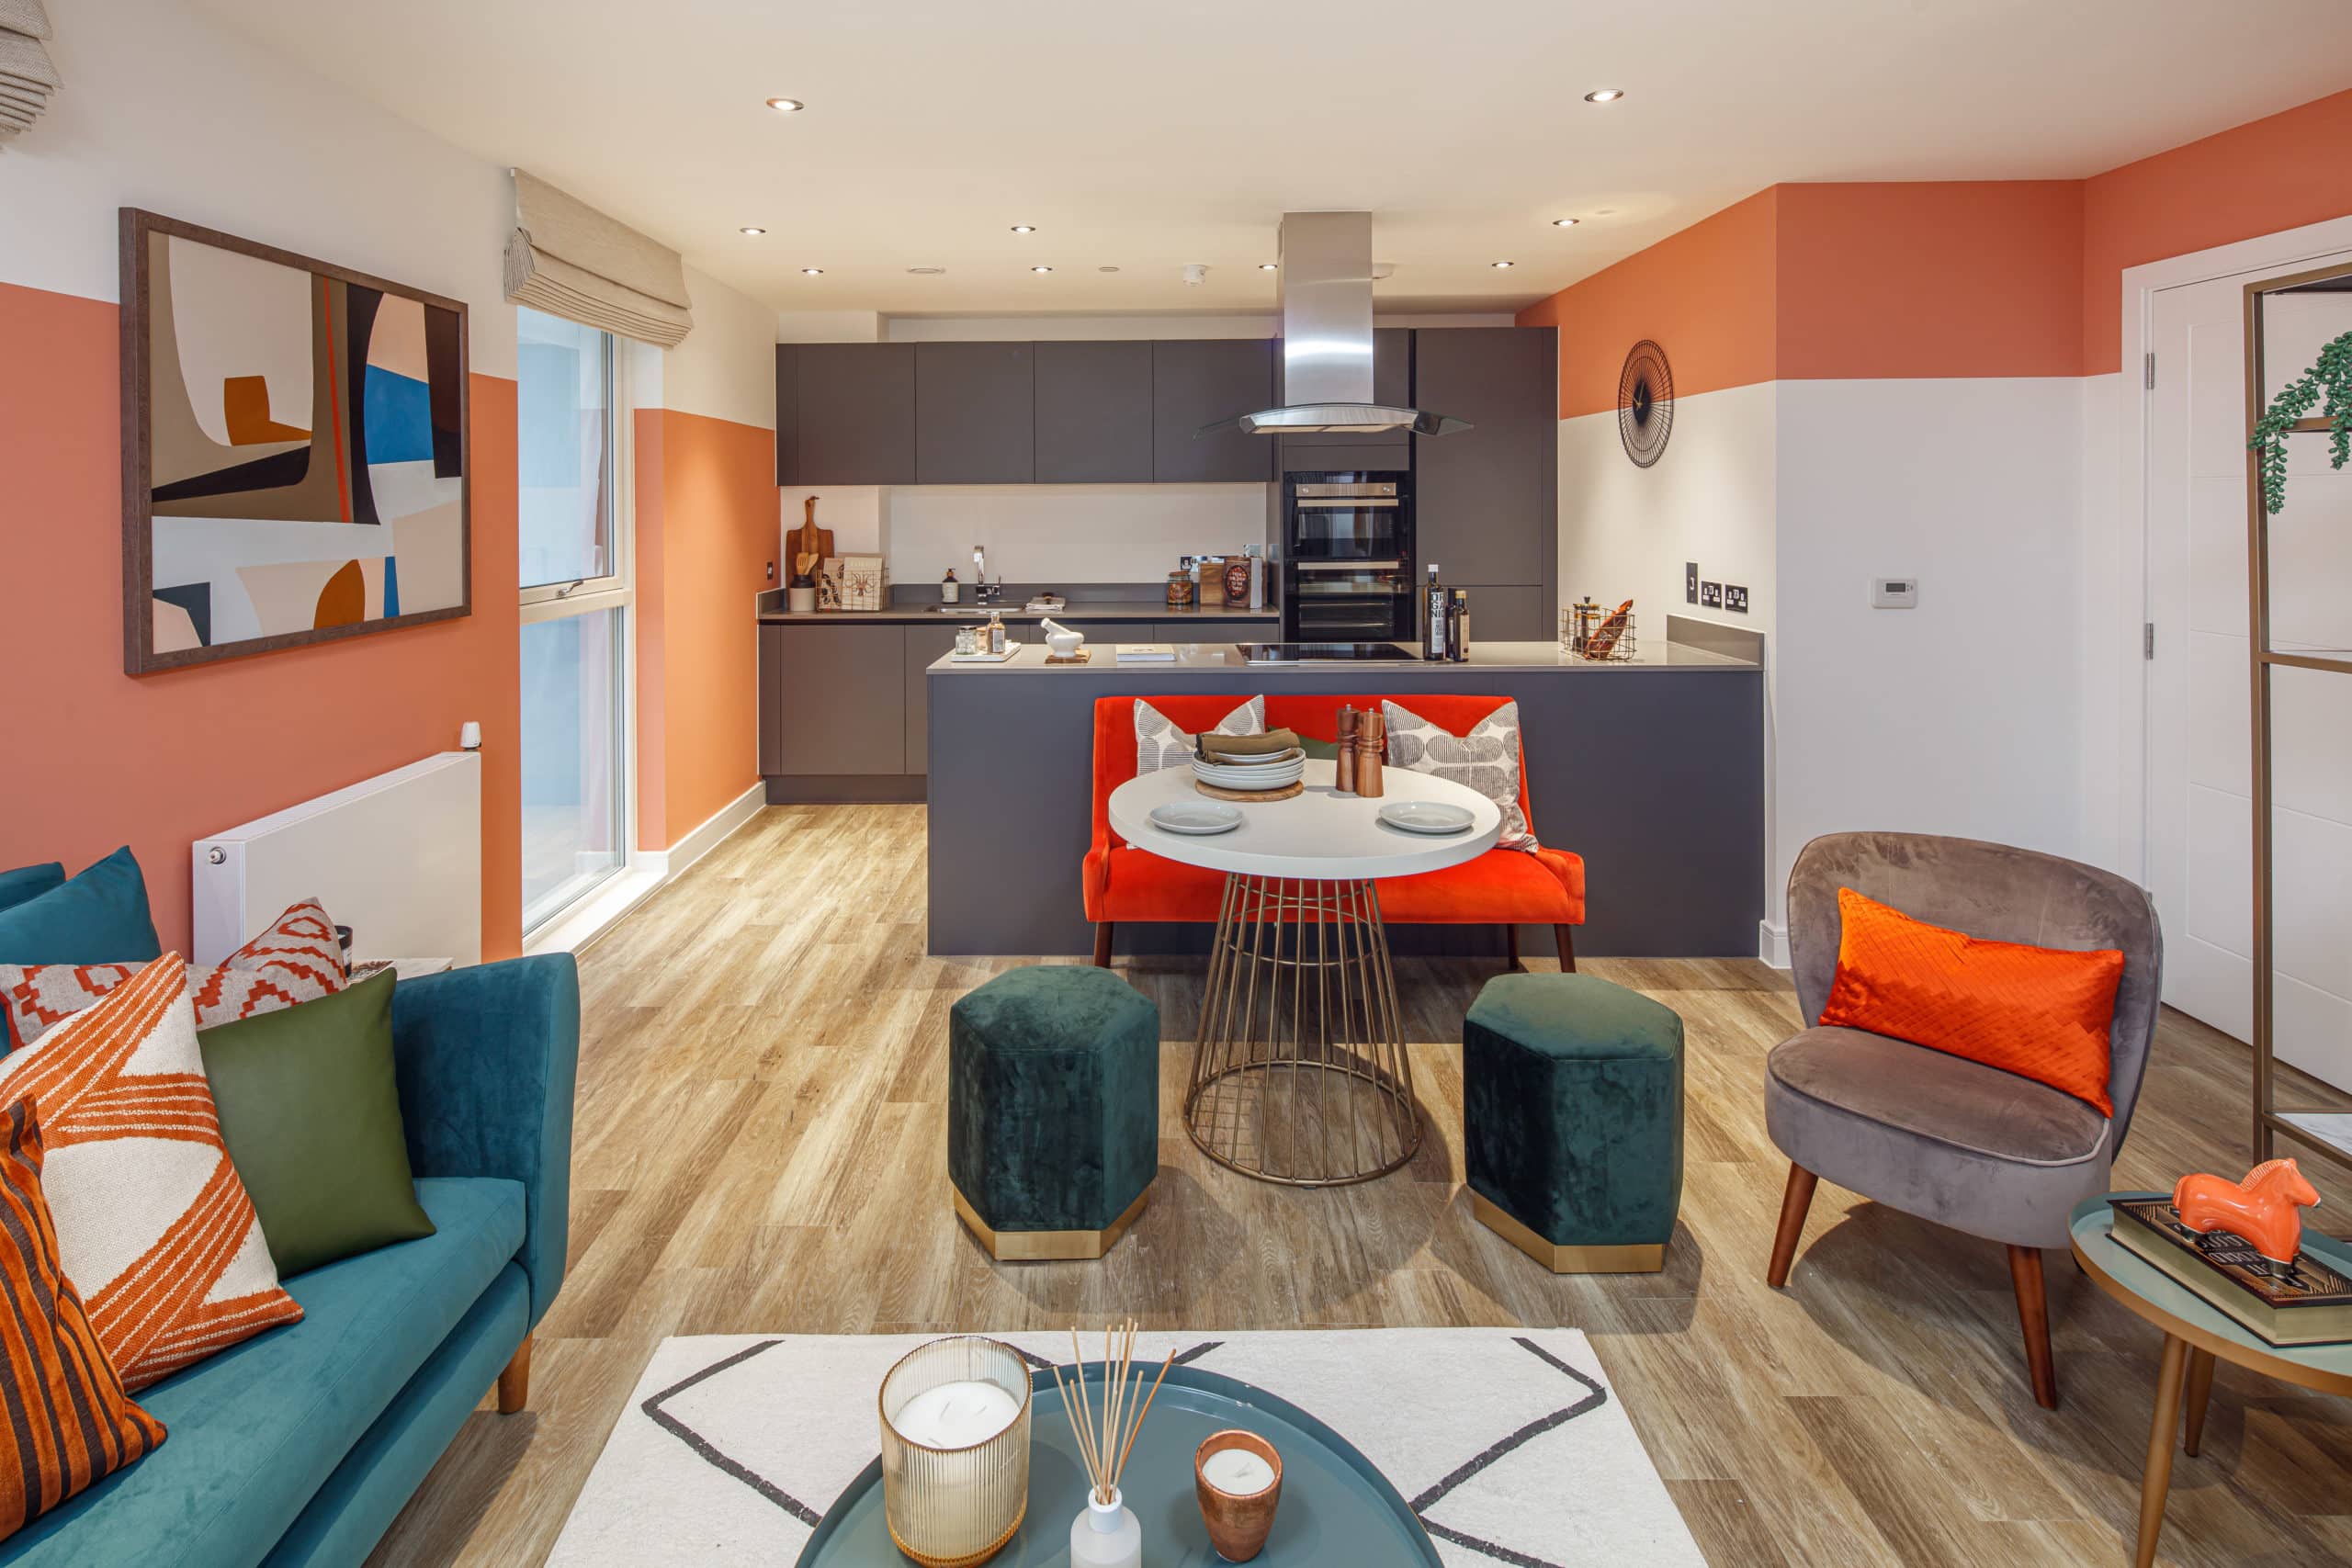 Kitchen at The Chain by L&Q - Shared Ownership & Help to Buy available on Share to Buy